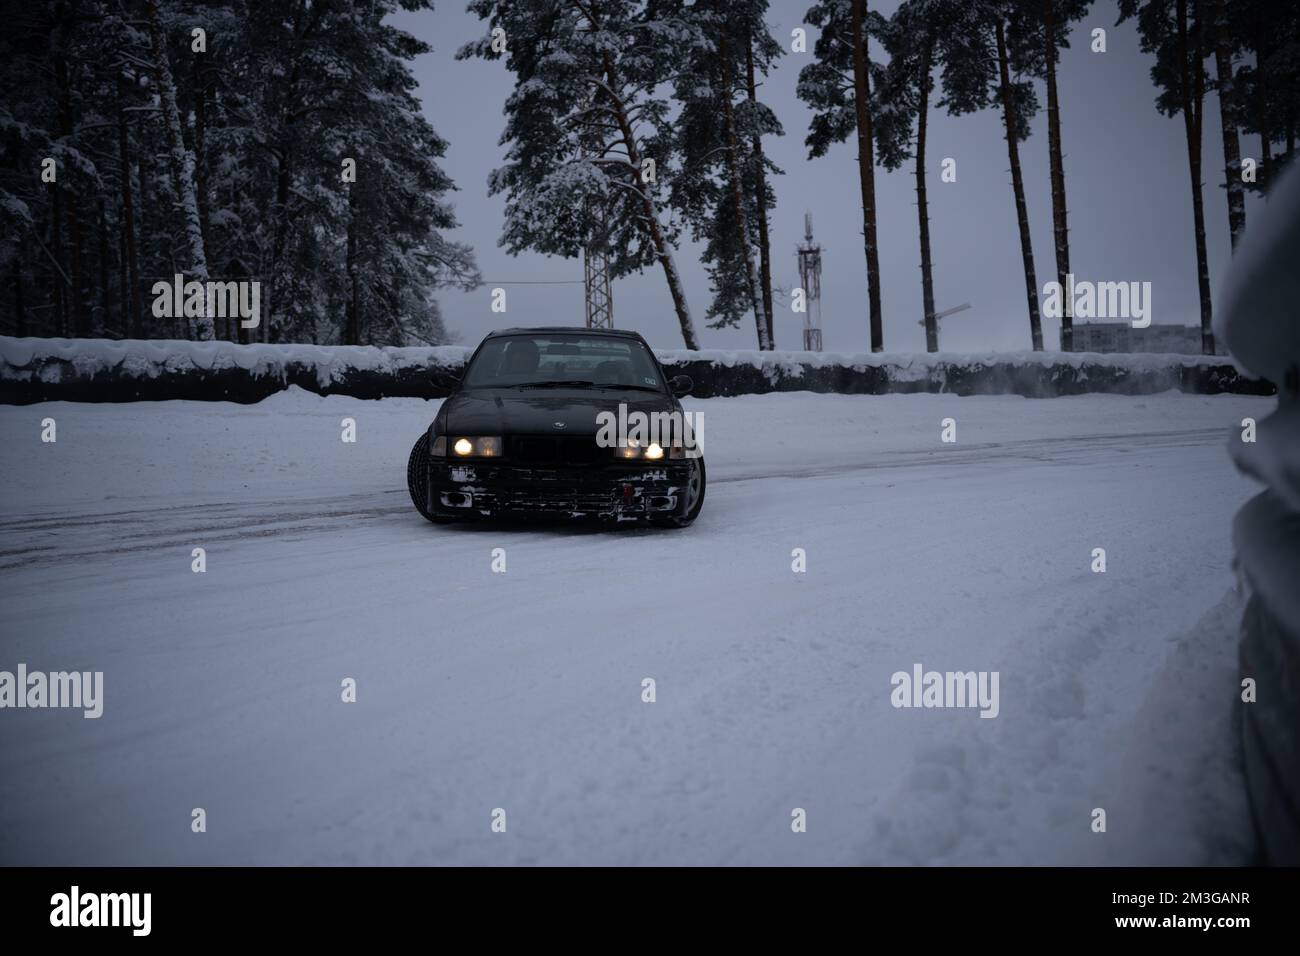 12-12-2022 Riga, Latvia  a car driving down a snowy road in the snow with headlights on and trees in the background and a person standing in the snow. Stock Photo